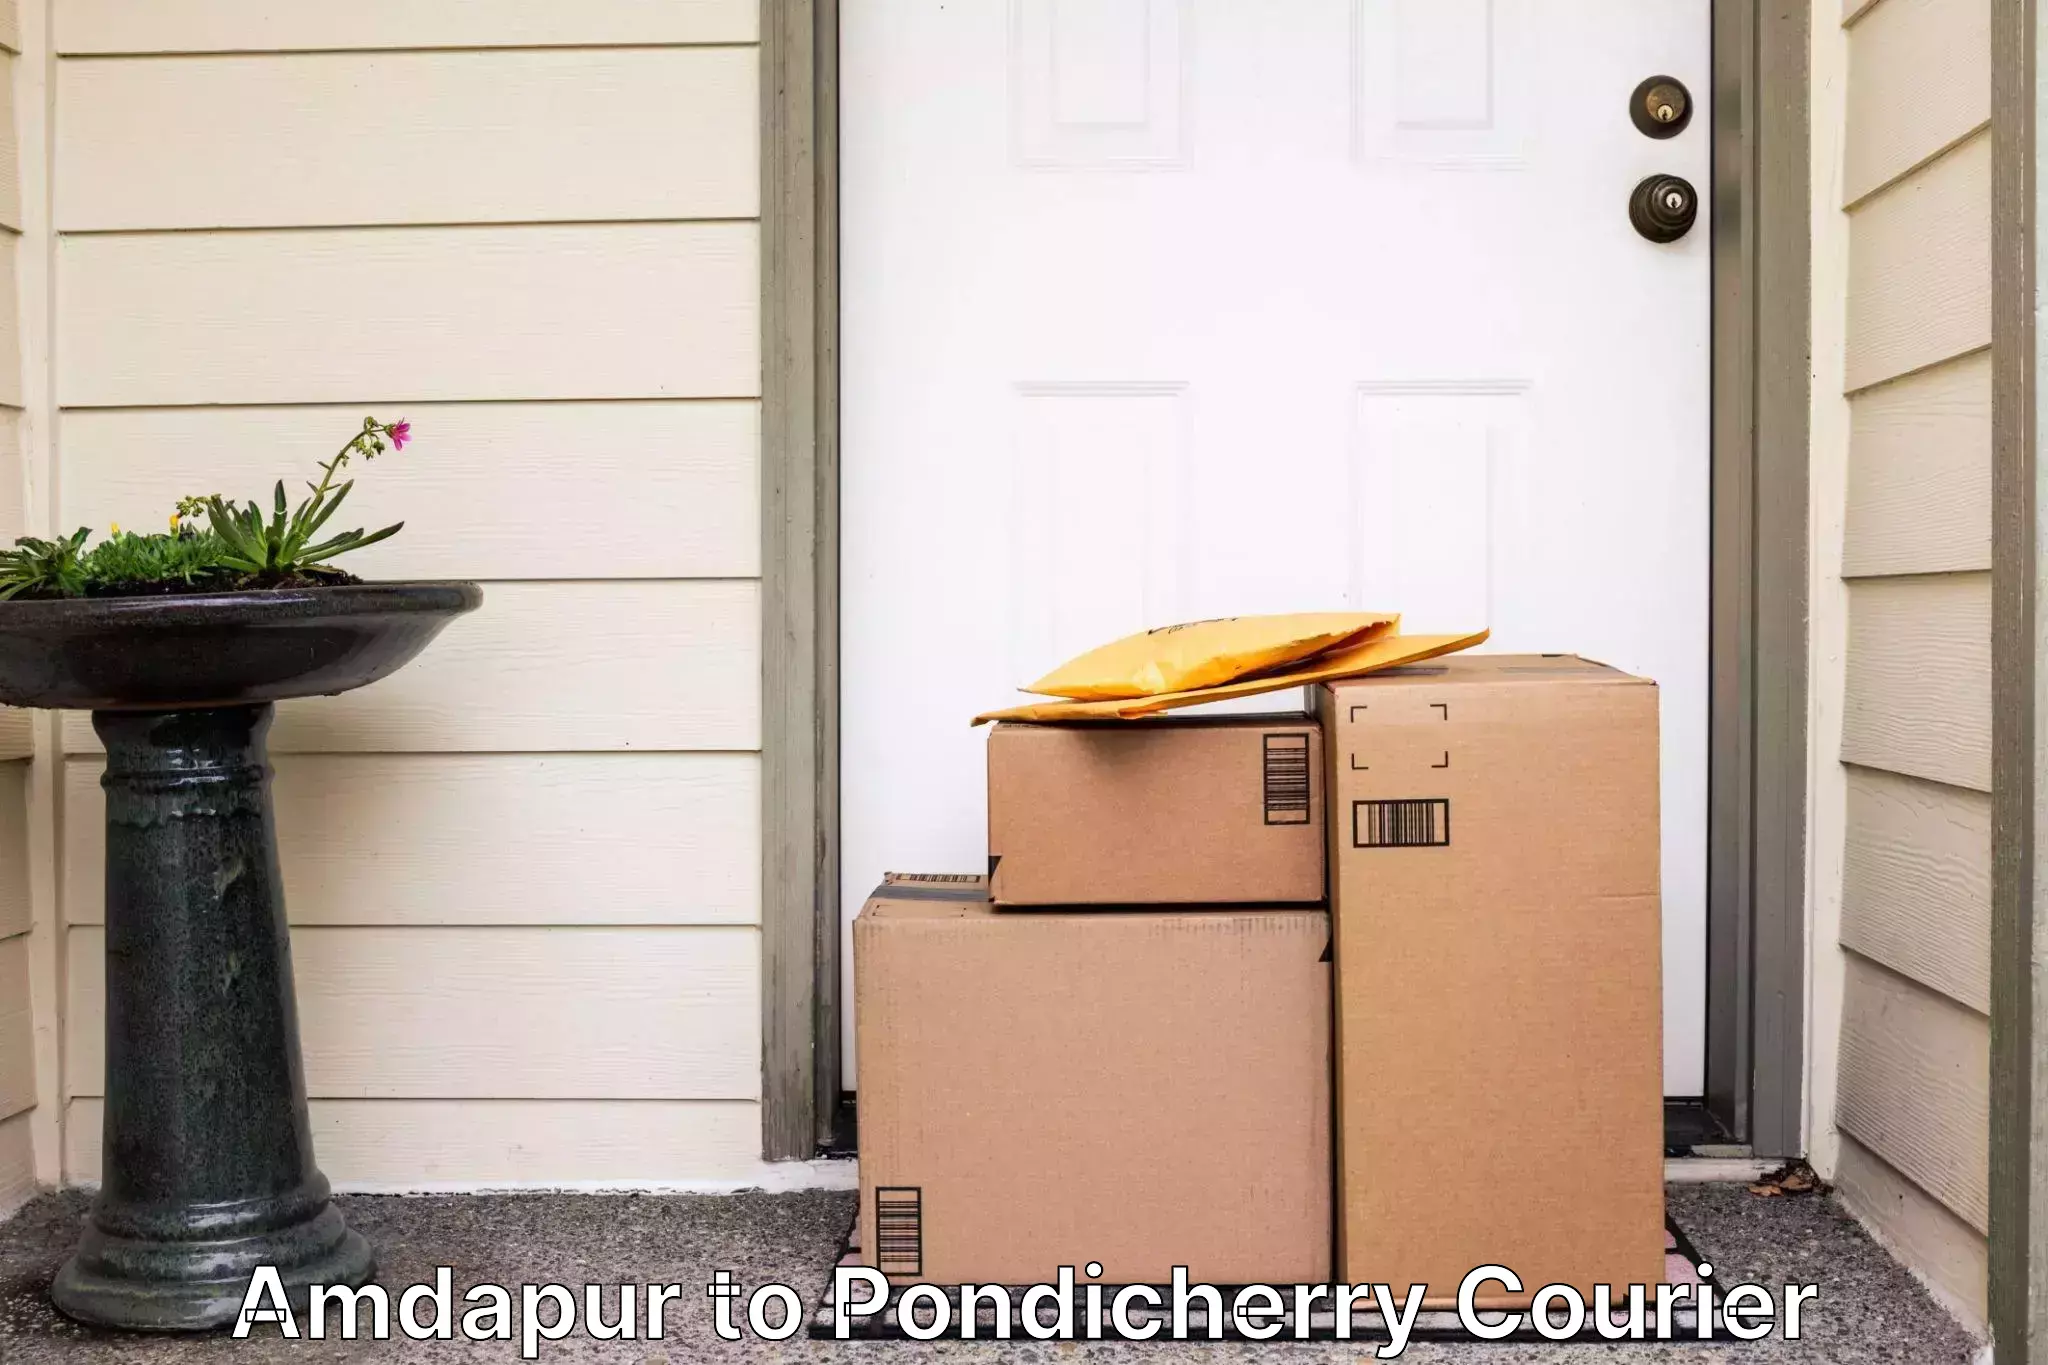 Baggage shipping experts Amdapur to Pondicherry